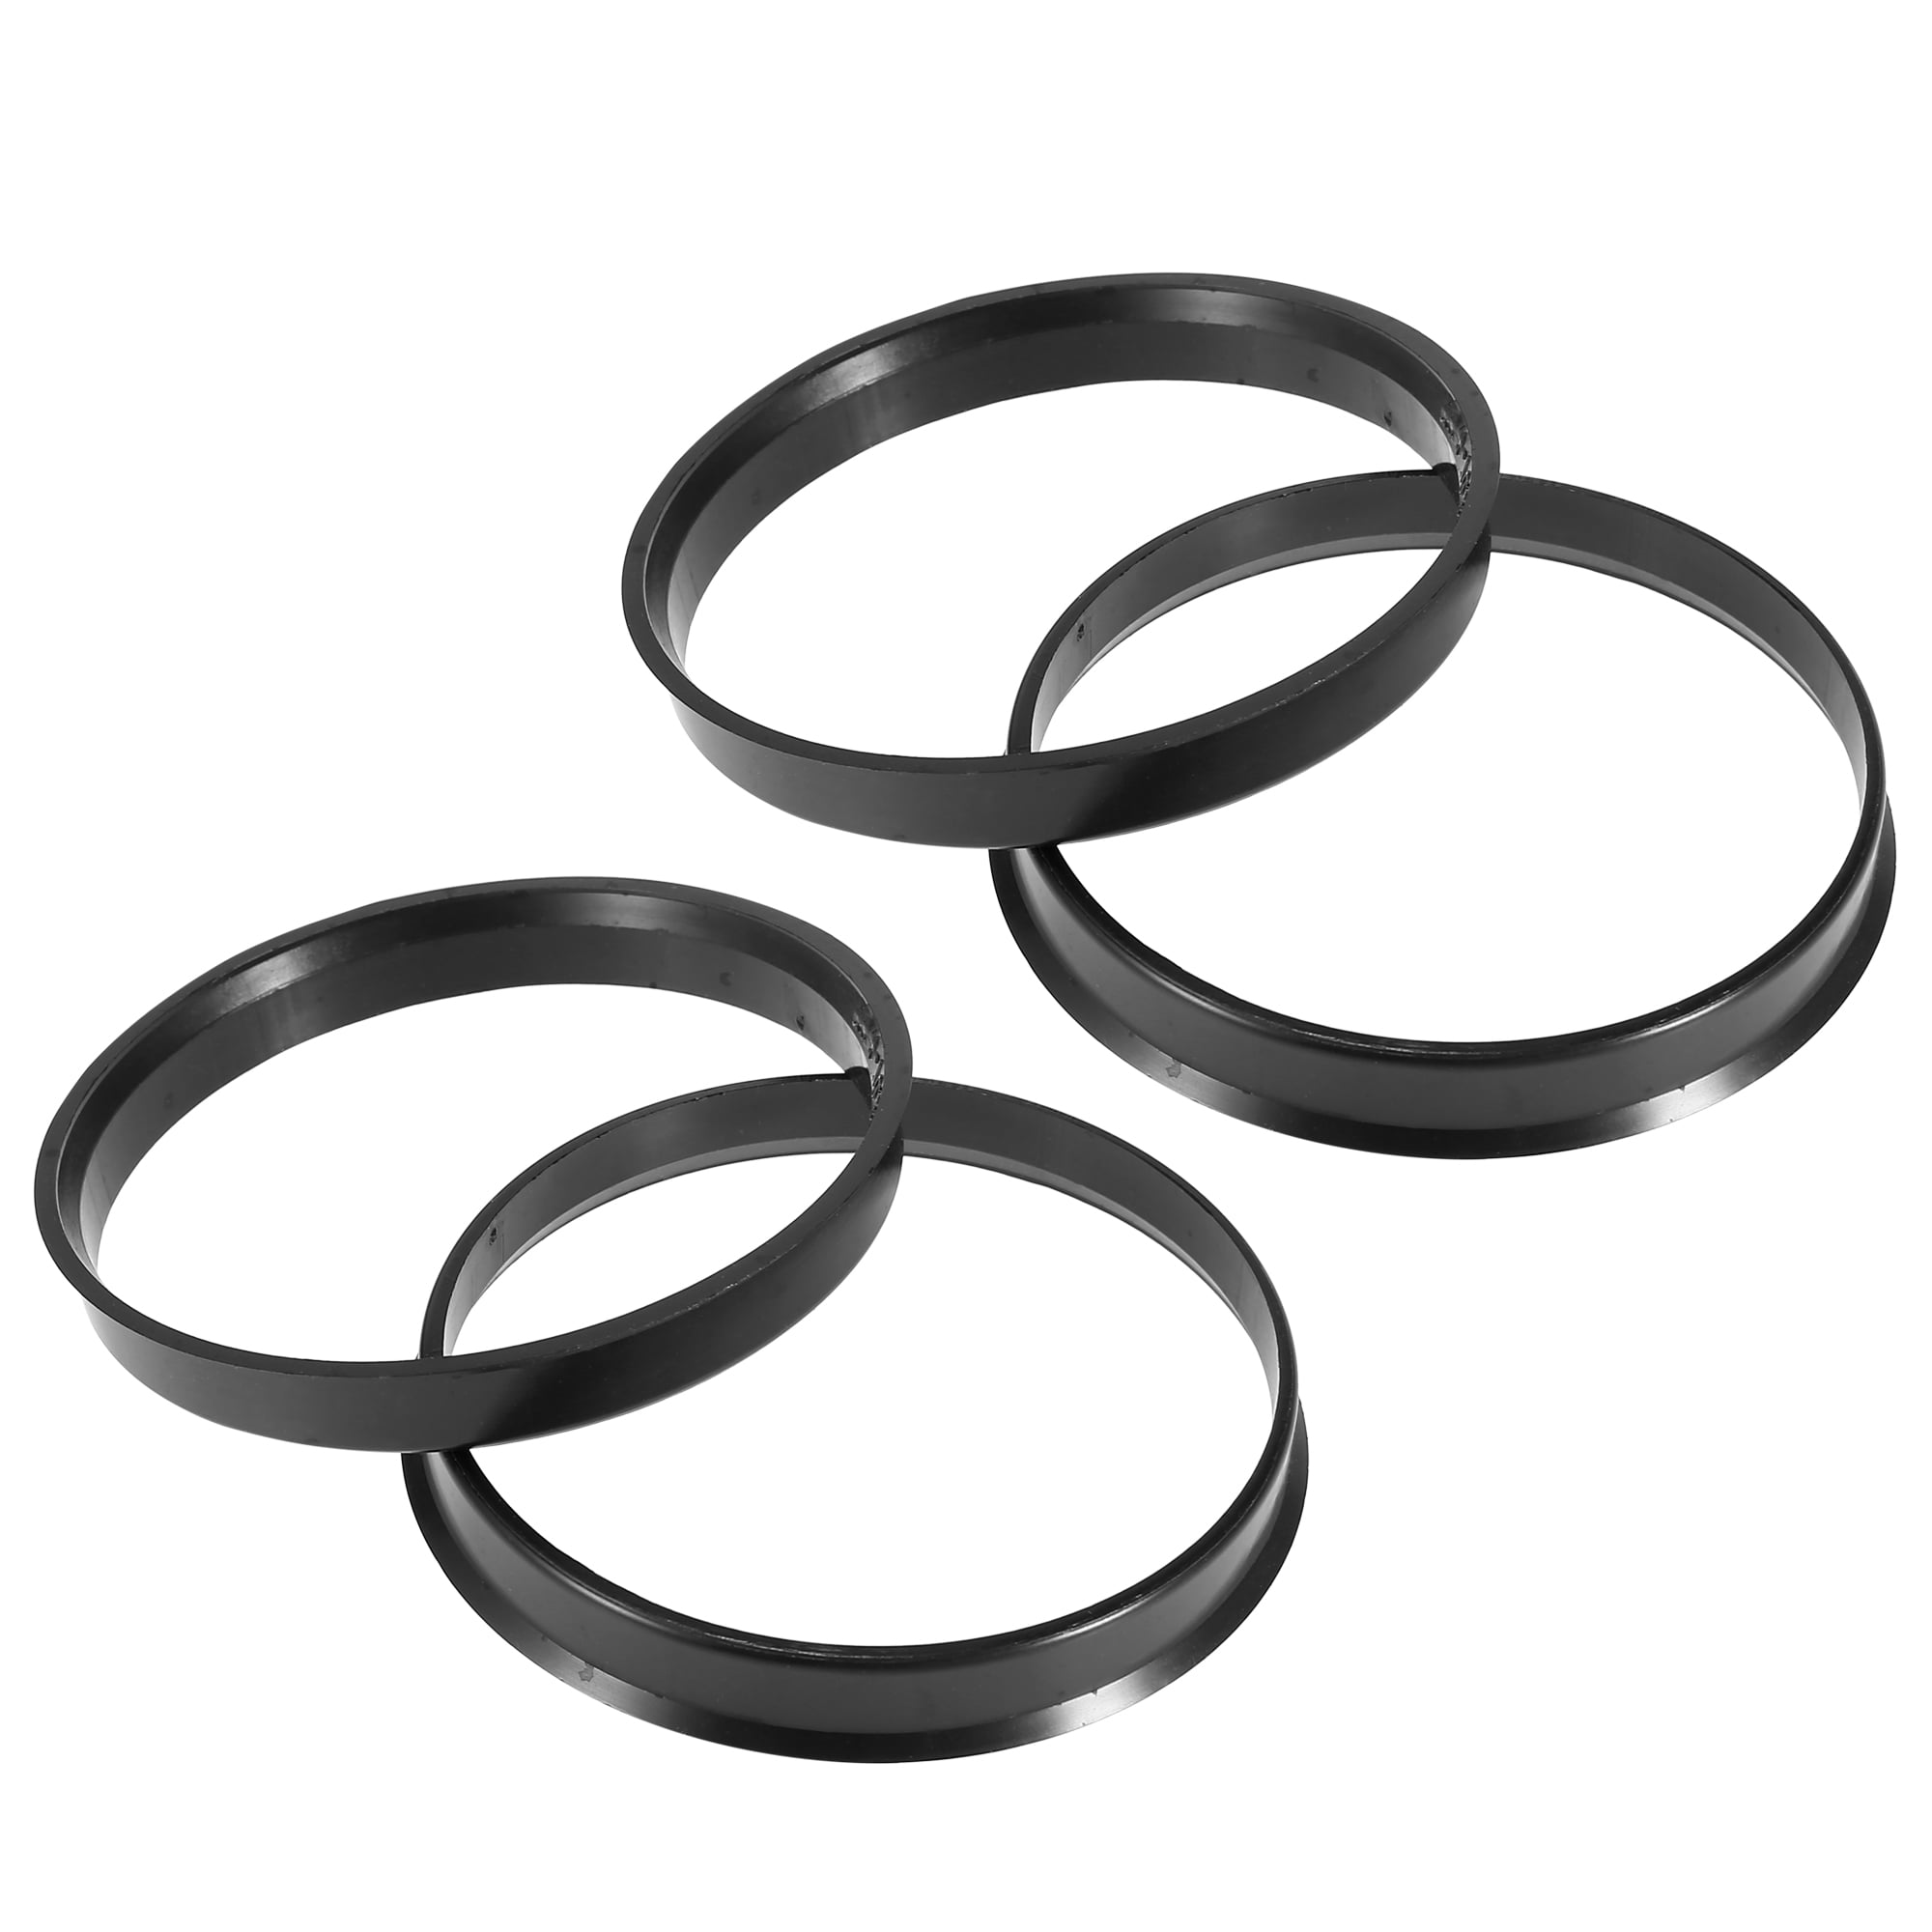 4pcs Plastic 70.3mm to 74.1mm Car Hub Centric Rings Wheel Bore Center Spacer